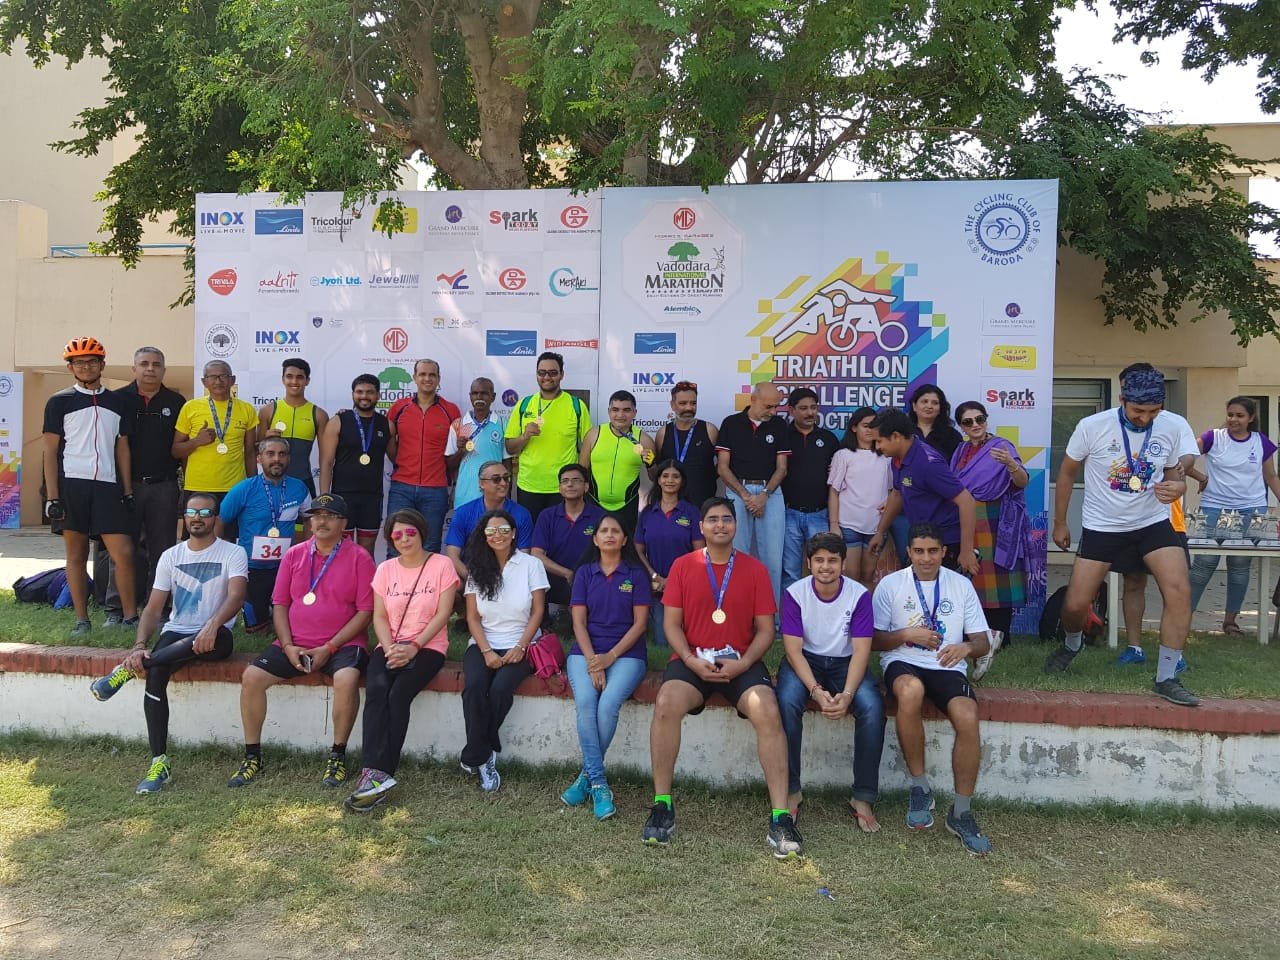 116 triathletes participated in the 4th edition of Triathlon challenge